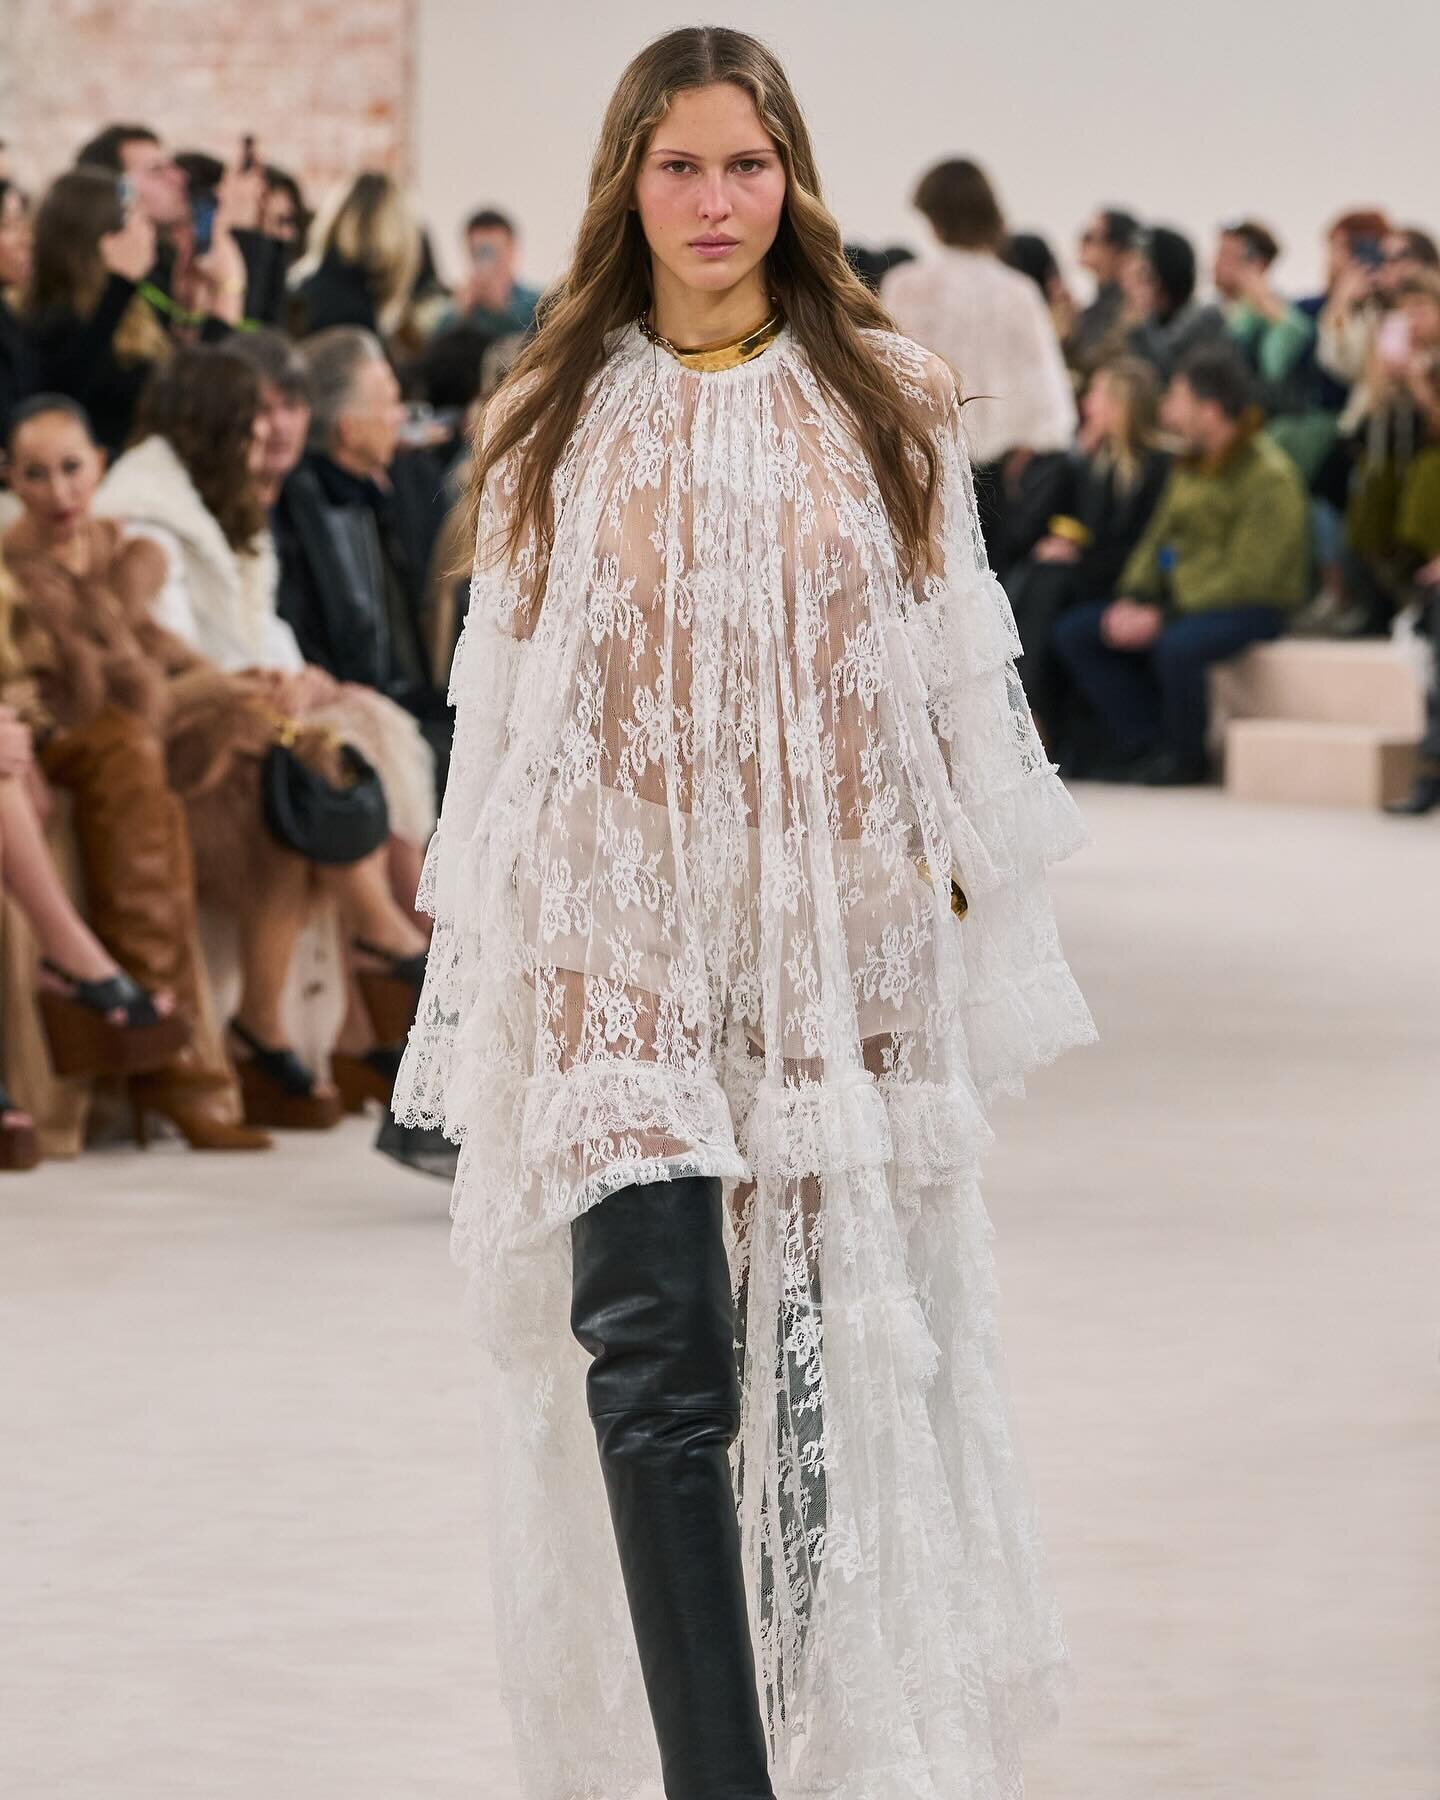 { WILDBRIDE RUNWAY } Crushing over the newest @chloe runway collection opening #ParisFashionWeek today. Designer @chemena making #boho magic with pretty white laces giving us #COOLBRIDE vibes!! ⚡️

#ChloeWinter24 #Chloe